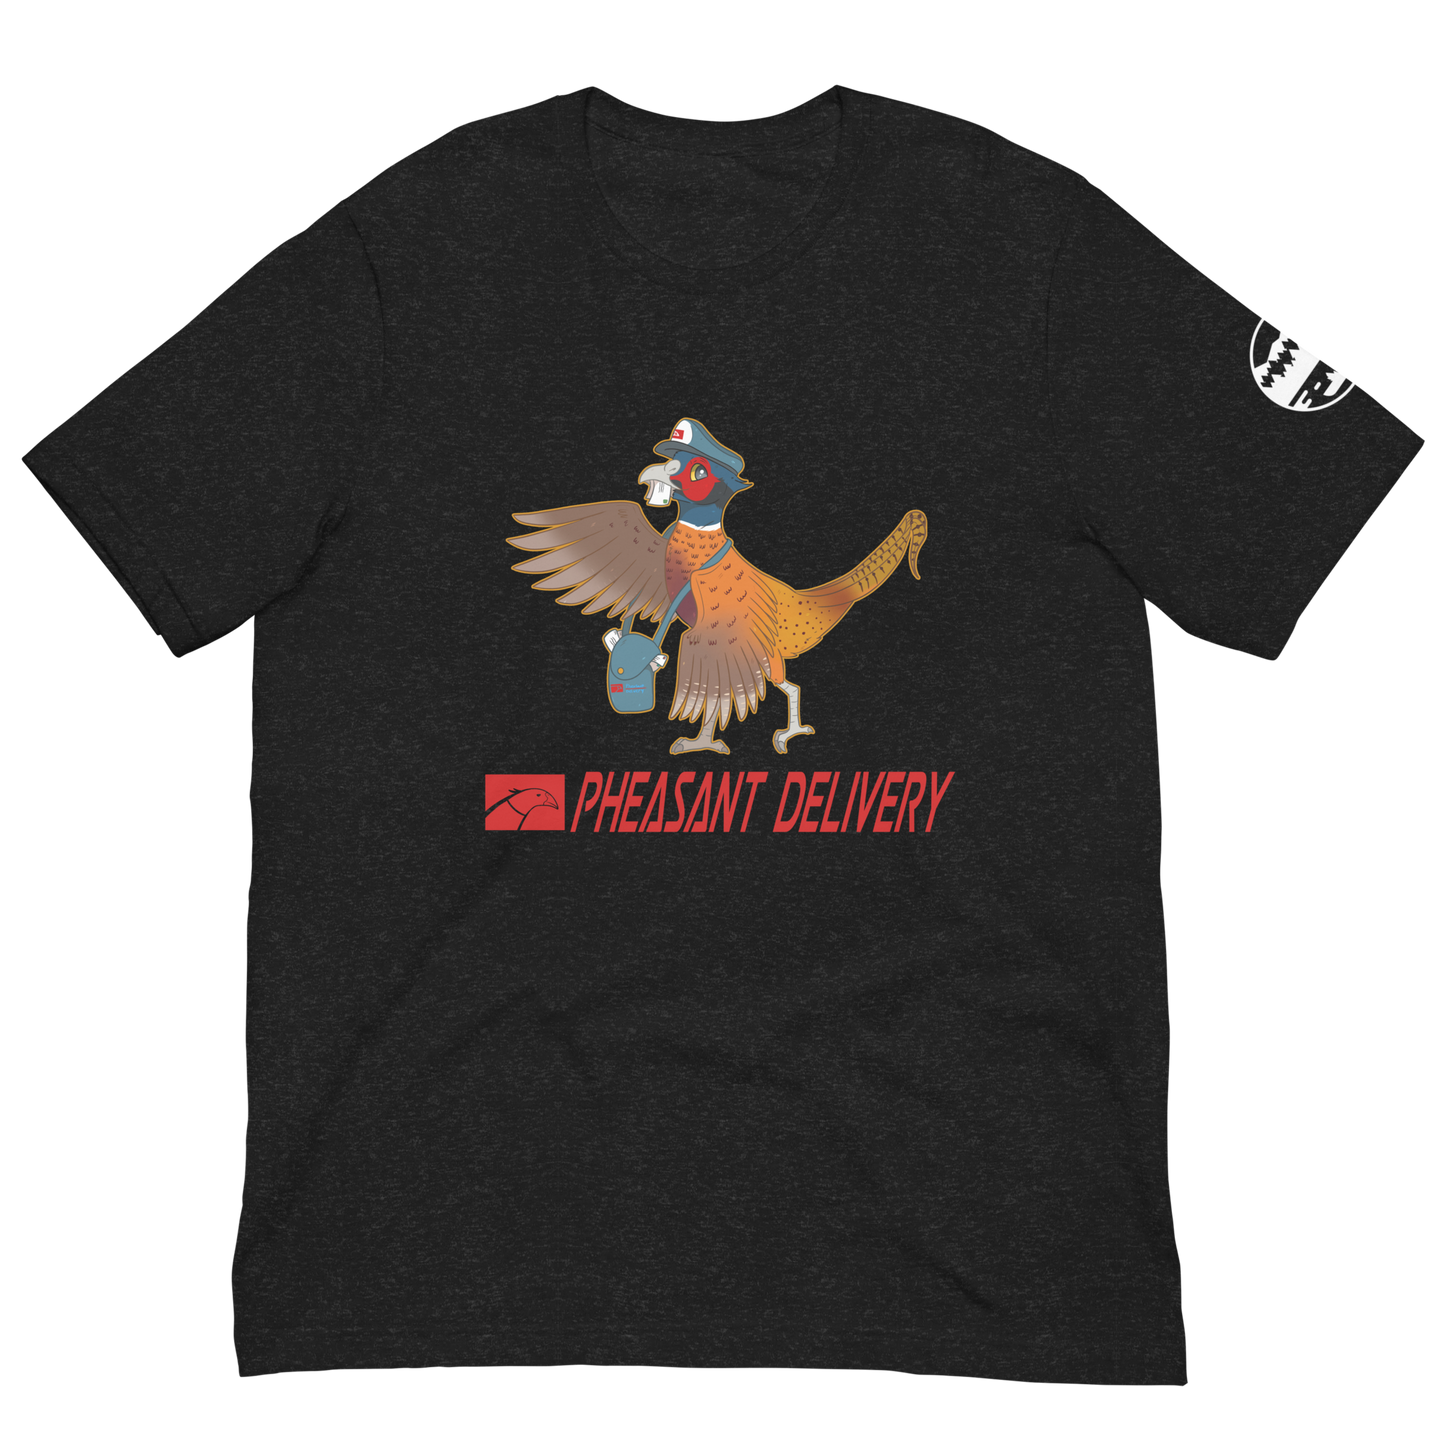 Pheasant Delivery! Shirt